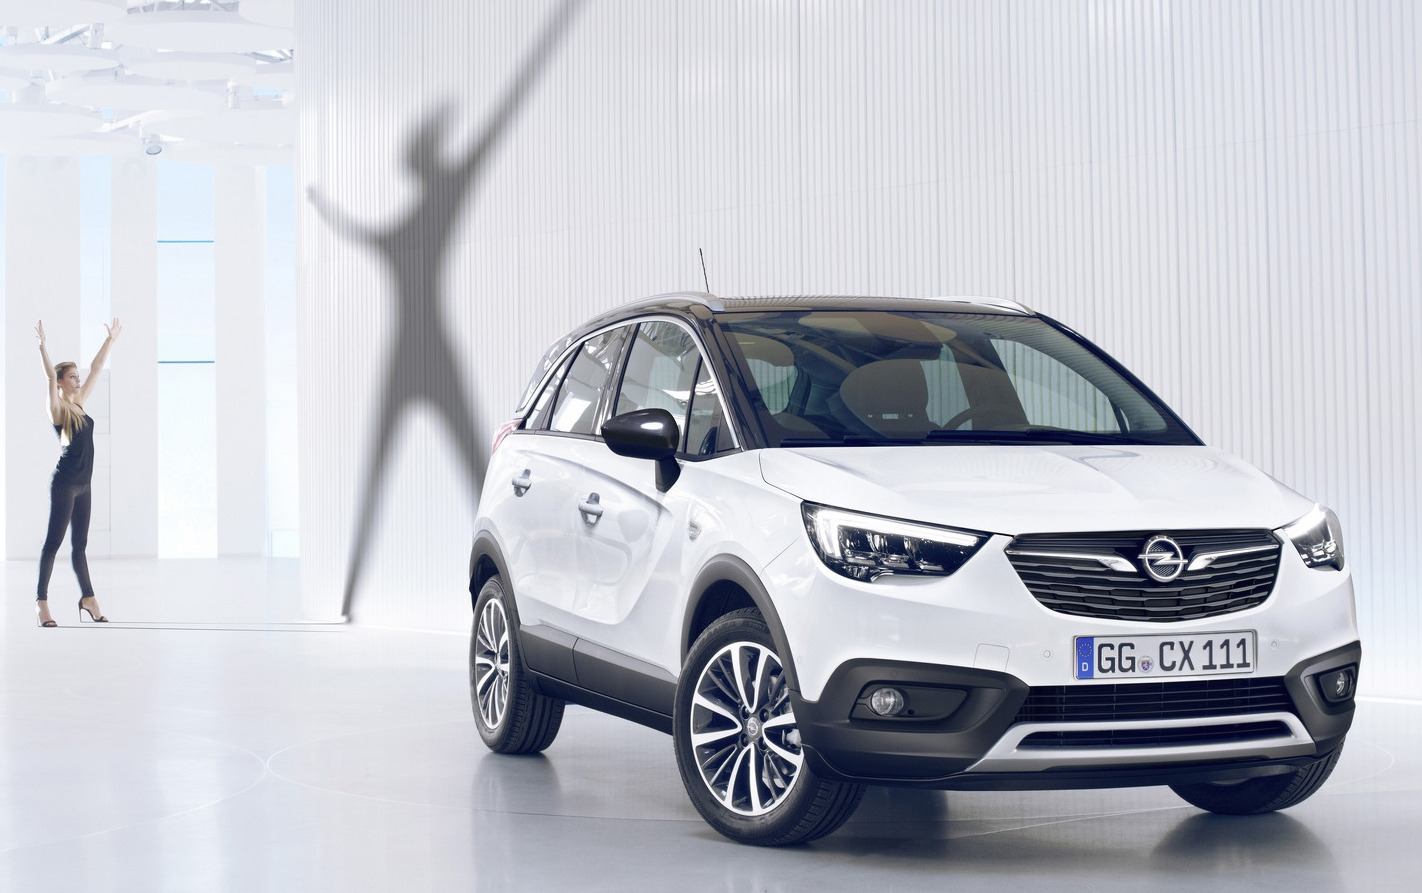 2017 Opel Crossland X revealed as new compact crossover